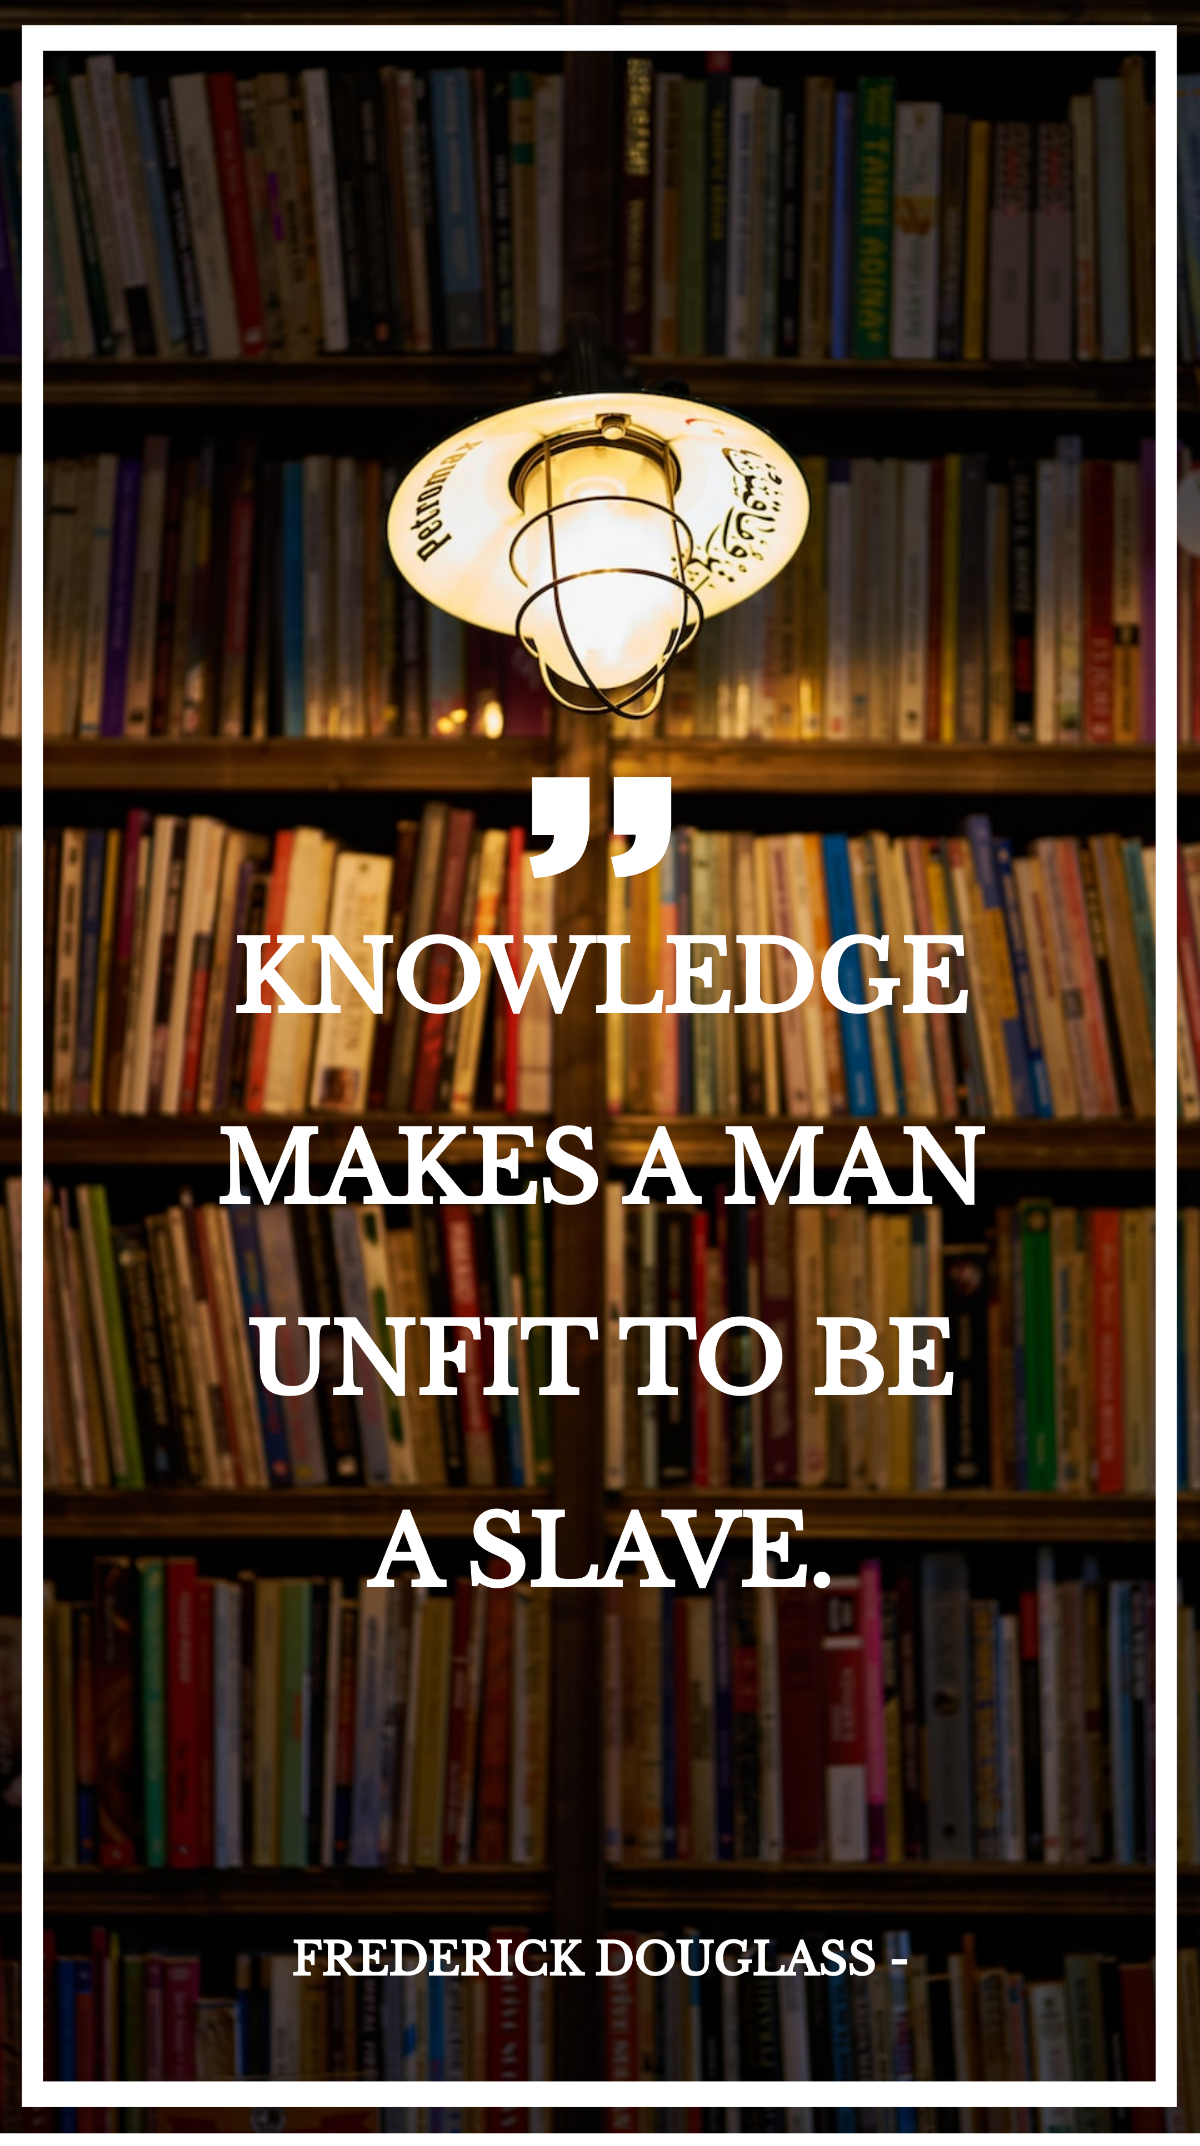 Frederick Douglass - Knowledge makes a man unfit to be a slave. Template